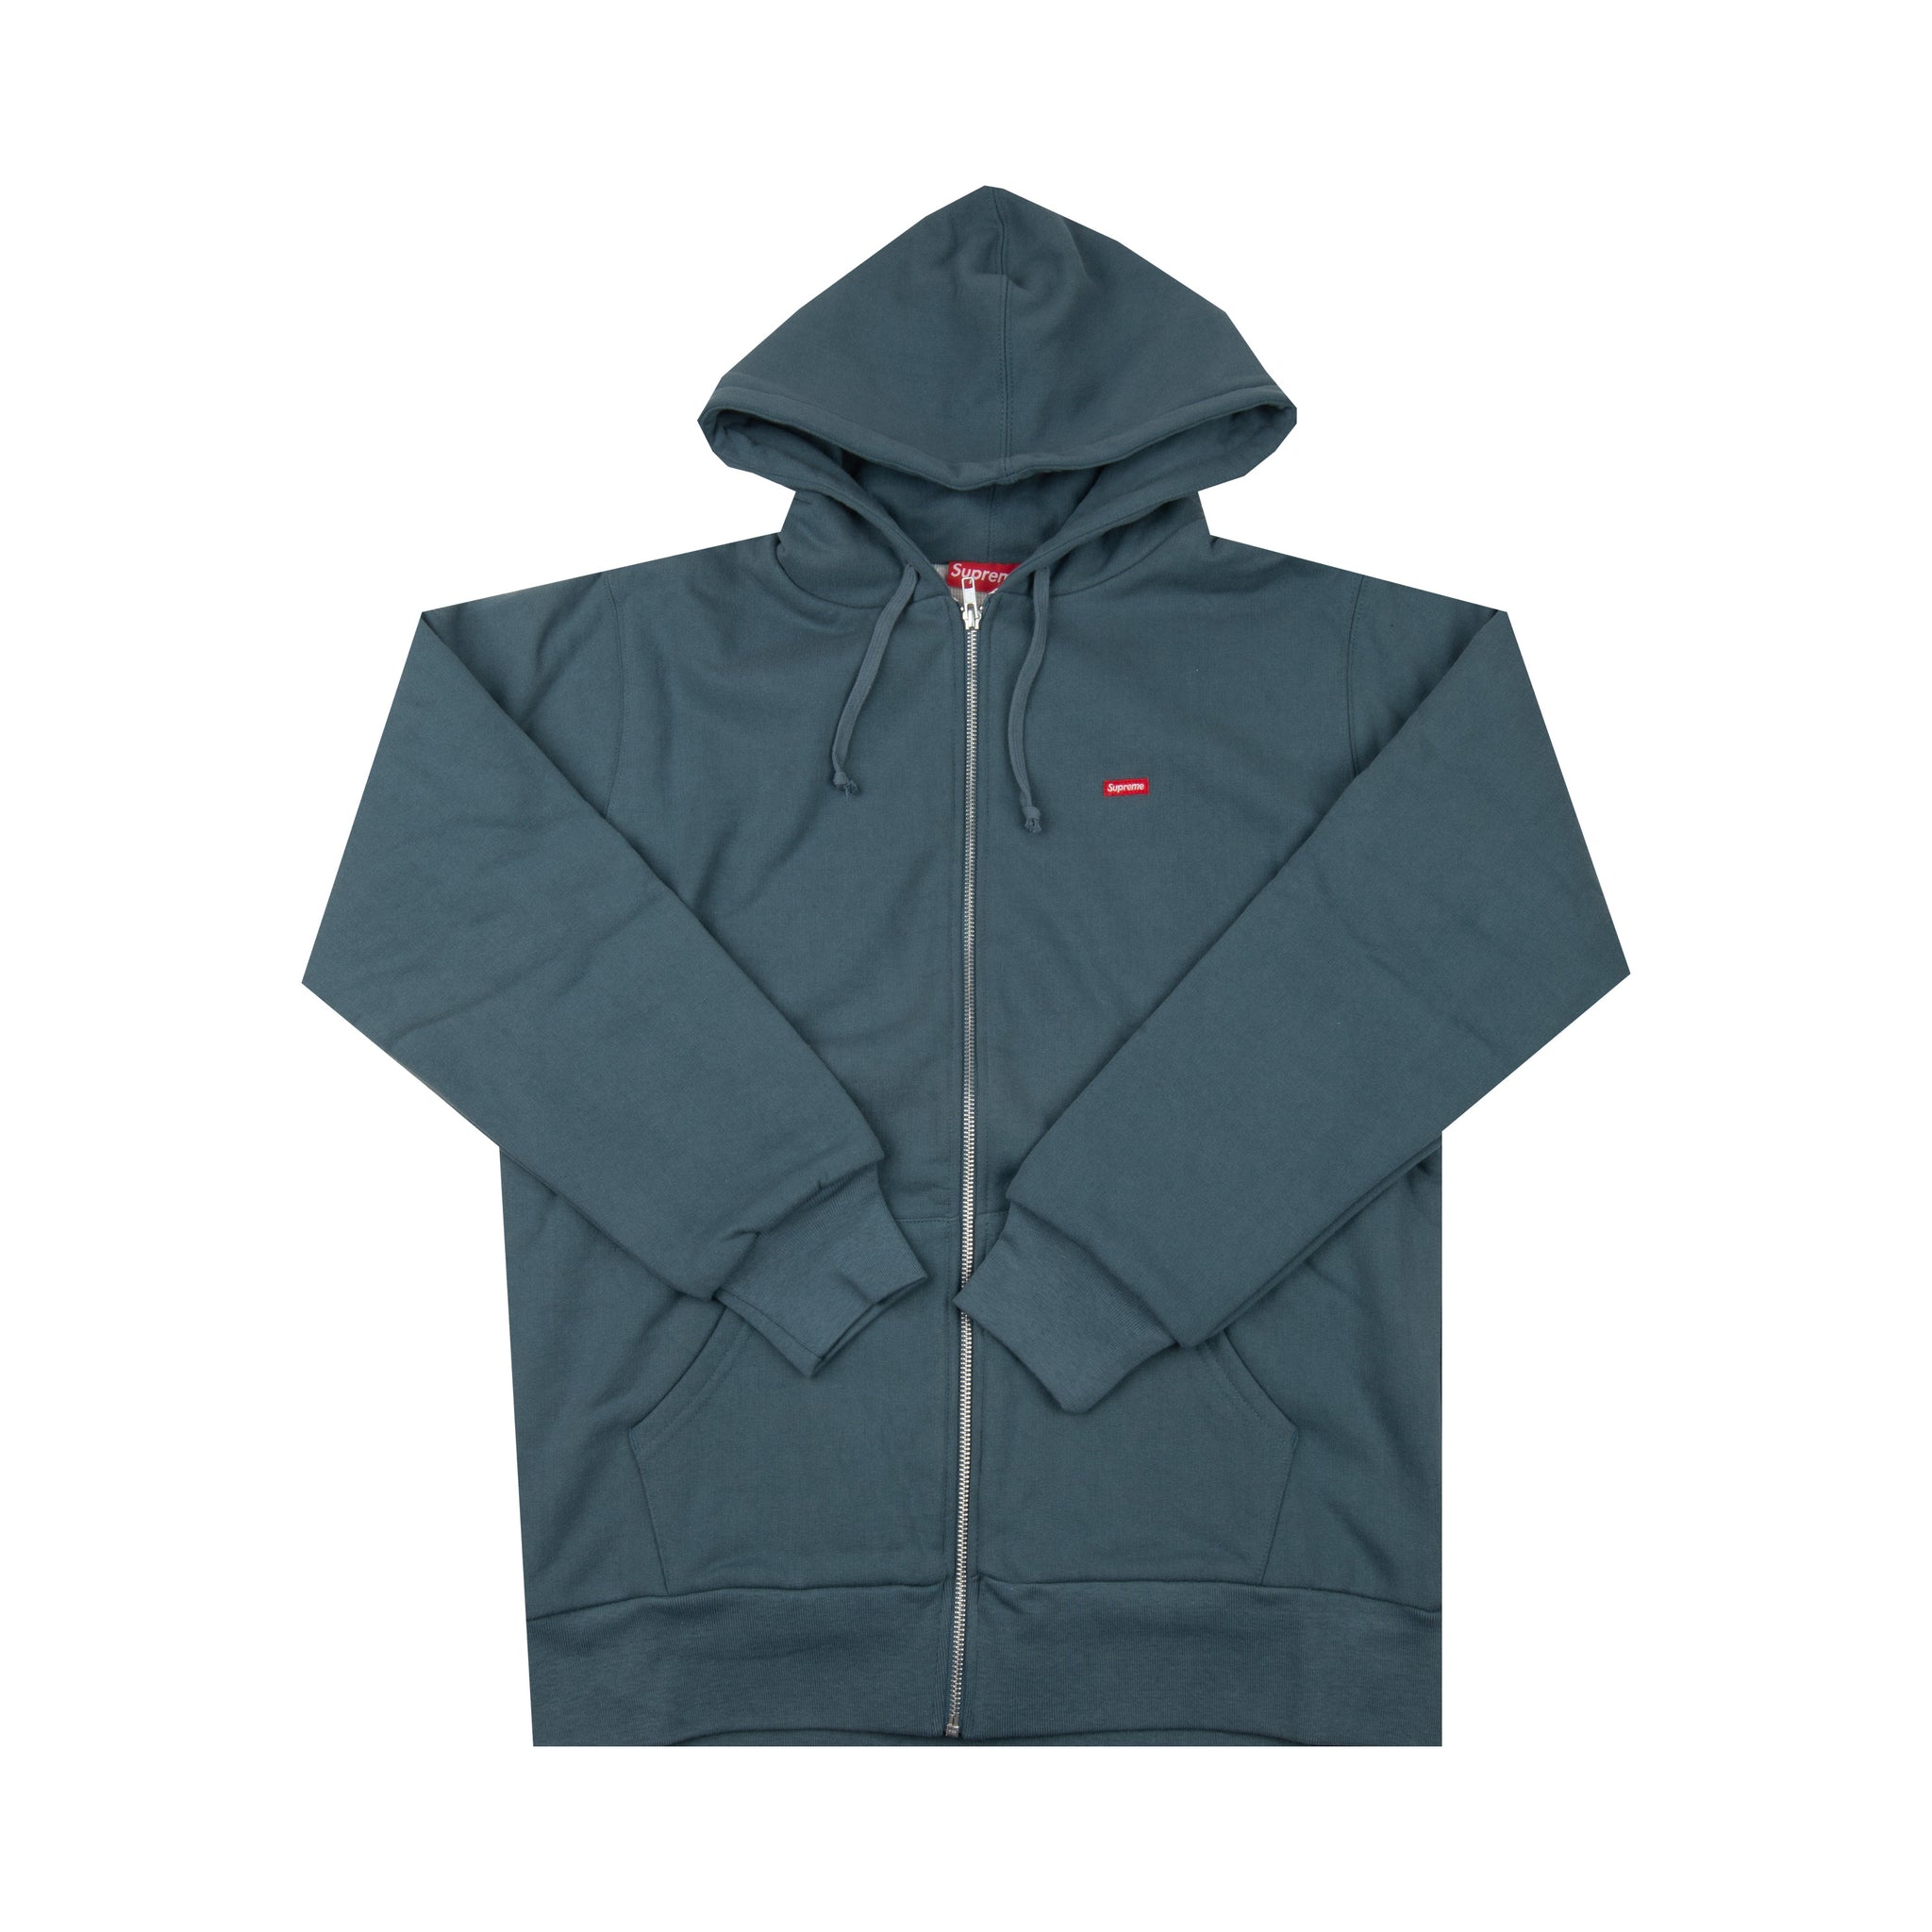 Supreme Teal Small Box Logo Thermal Lined Zip Up